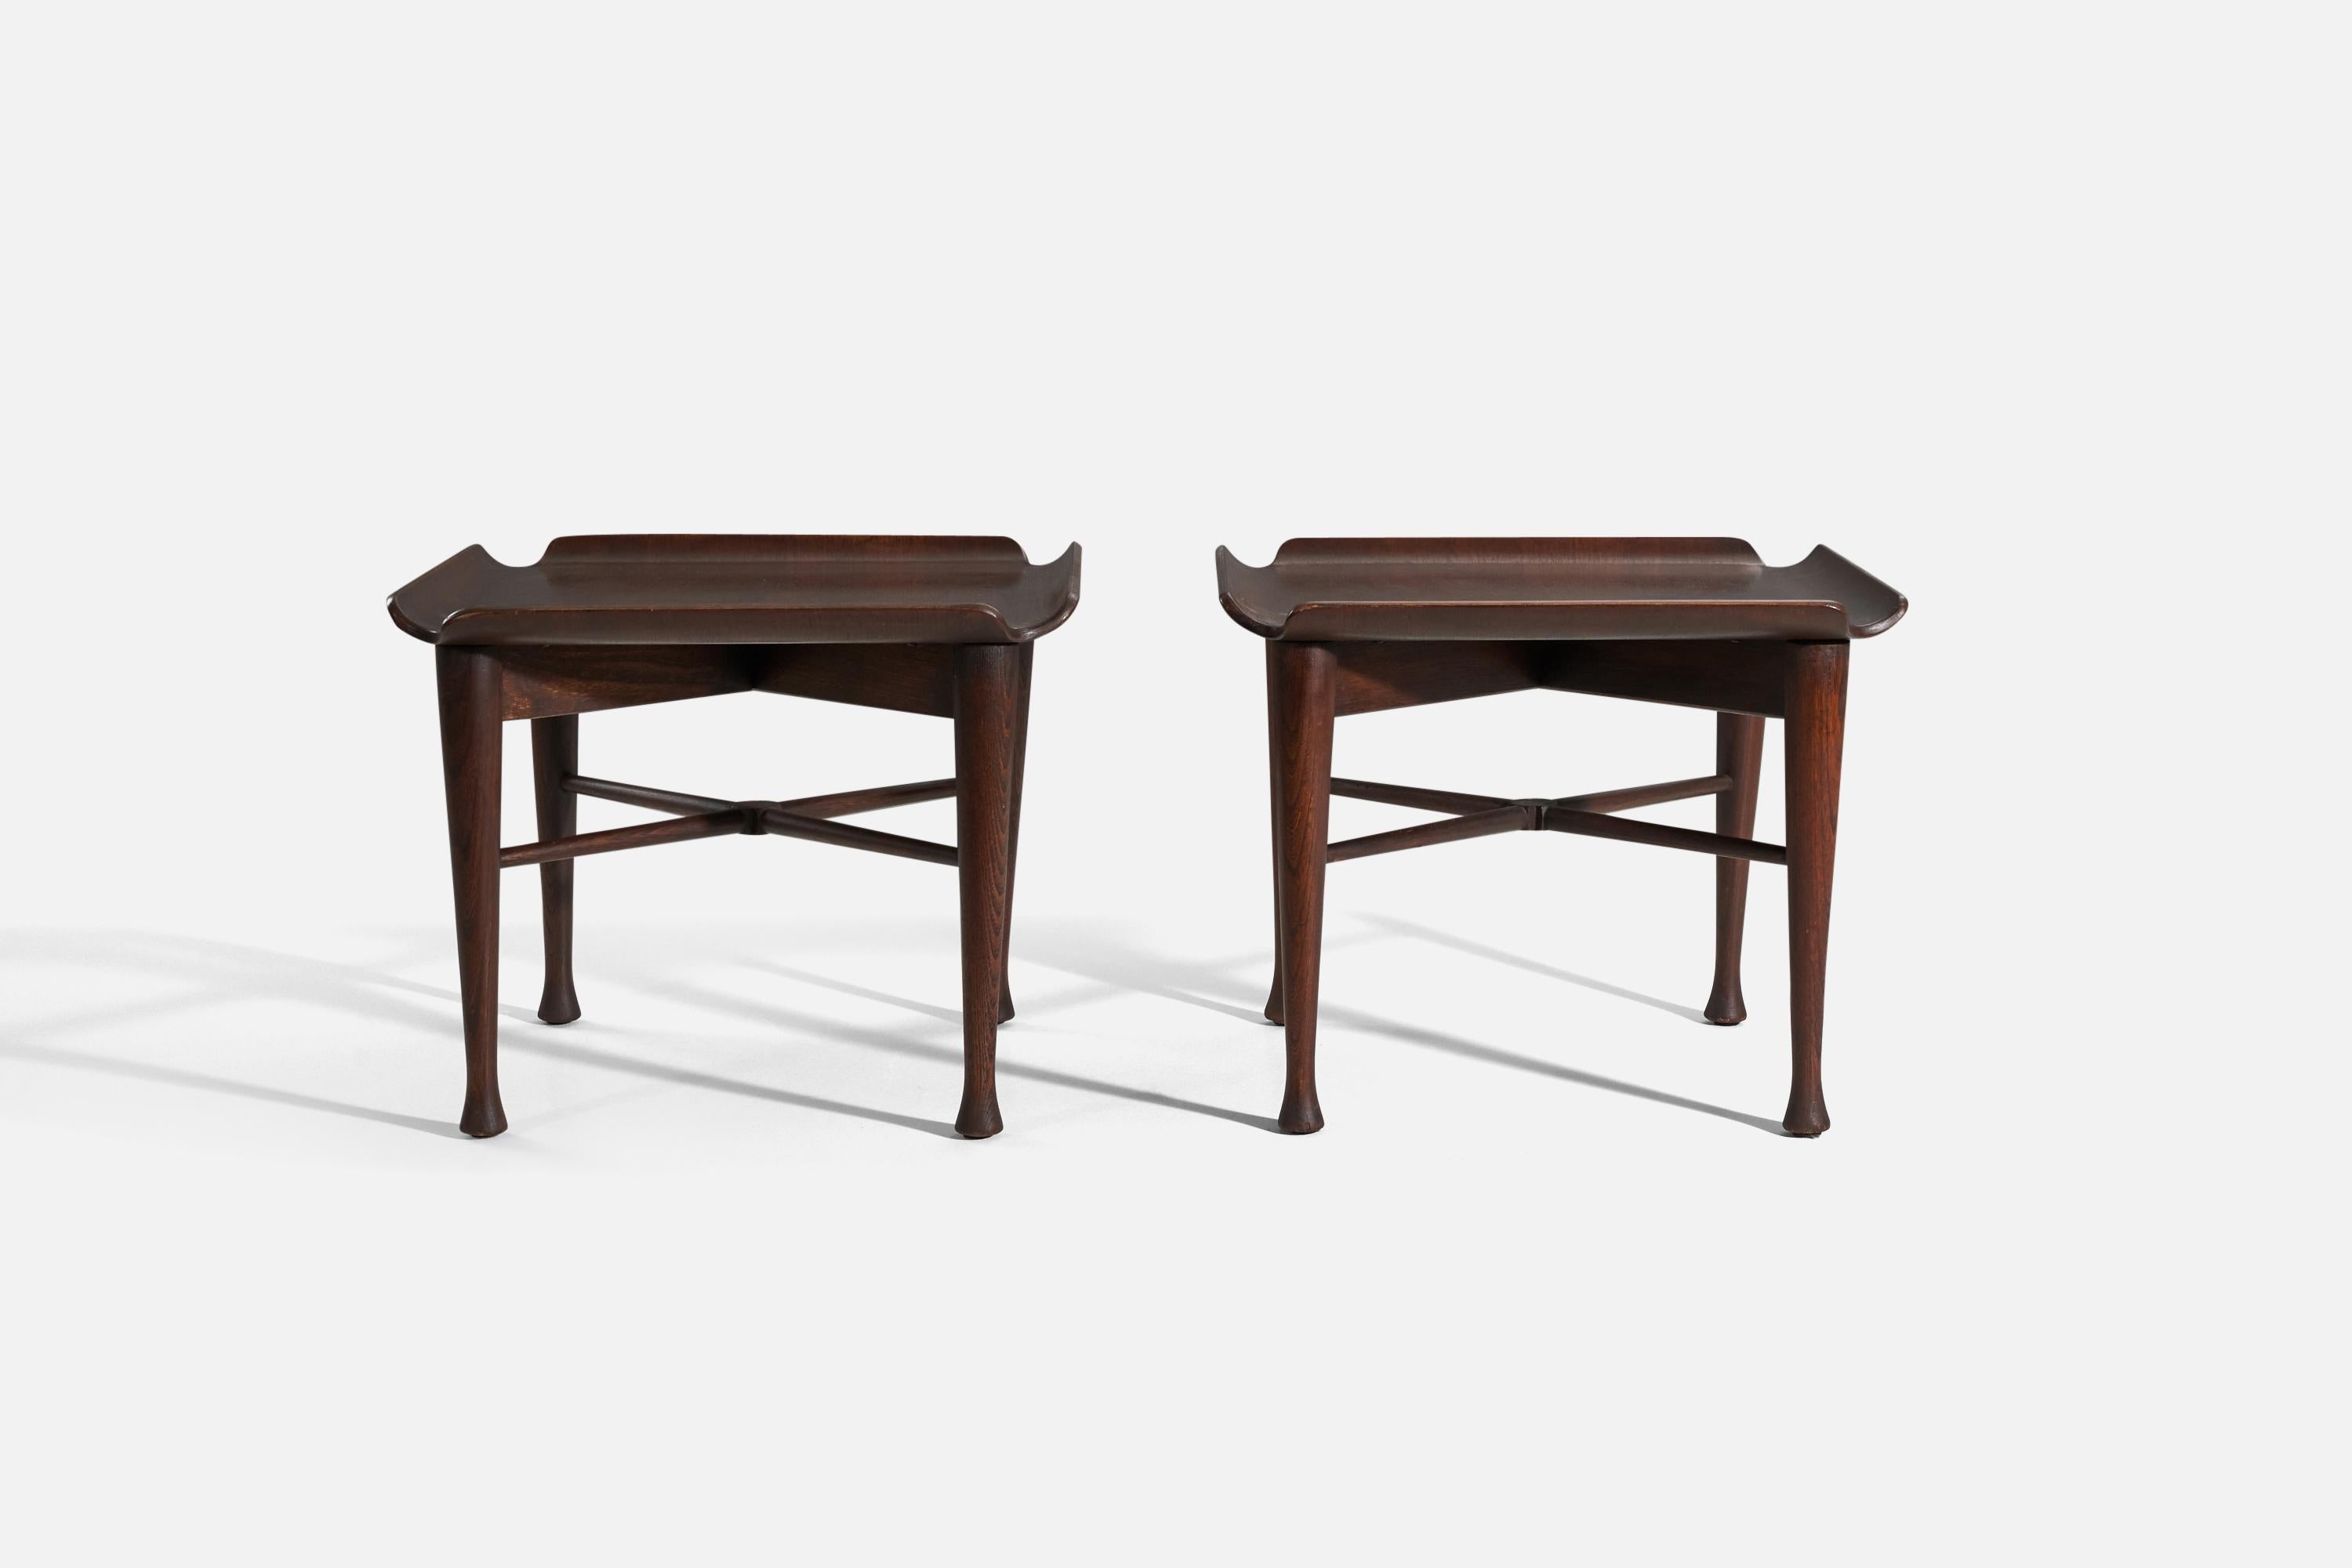 A pair of solid walnut and molded walnut plywood side tables/end tables, designed by Lawrence Peabody and produced by Richardson Nemschoff, United States, 1960s.
   